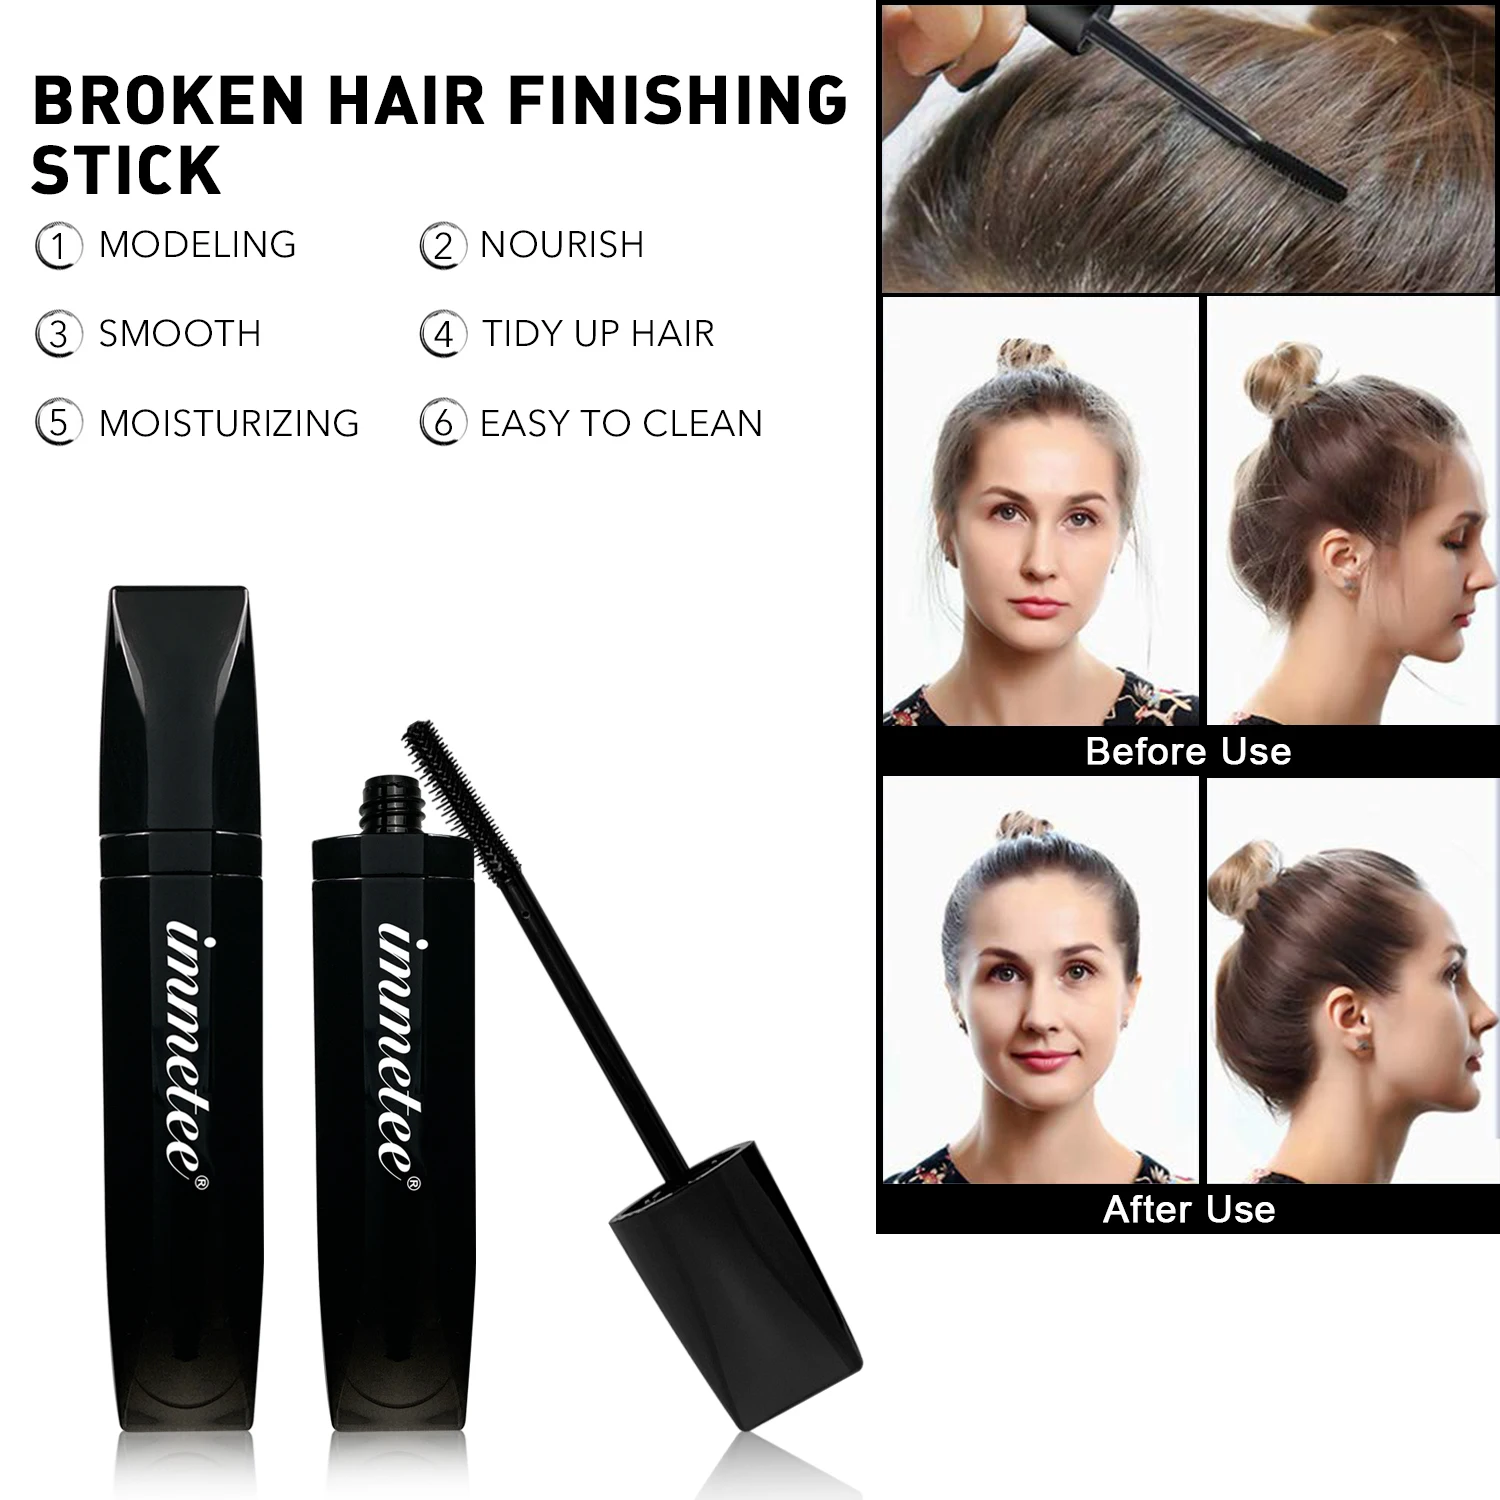 hair care products natural anti hair loss prevention hair loss treatment rapid growth nourishment dry damaged hair care Broken Hair Finishing Stick Untidy Hair Finishing Liquid Cream Rapid Fixed Hair Gel Not Greasy Broken Hair Shaping Styling Gel